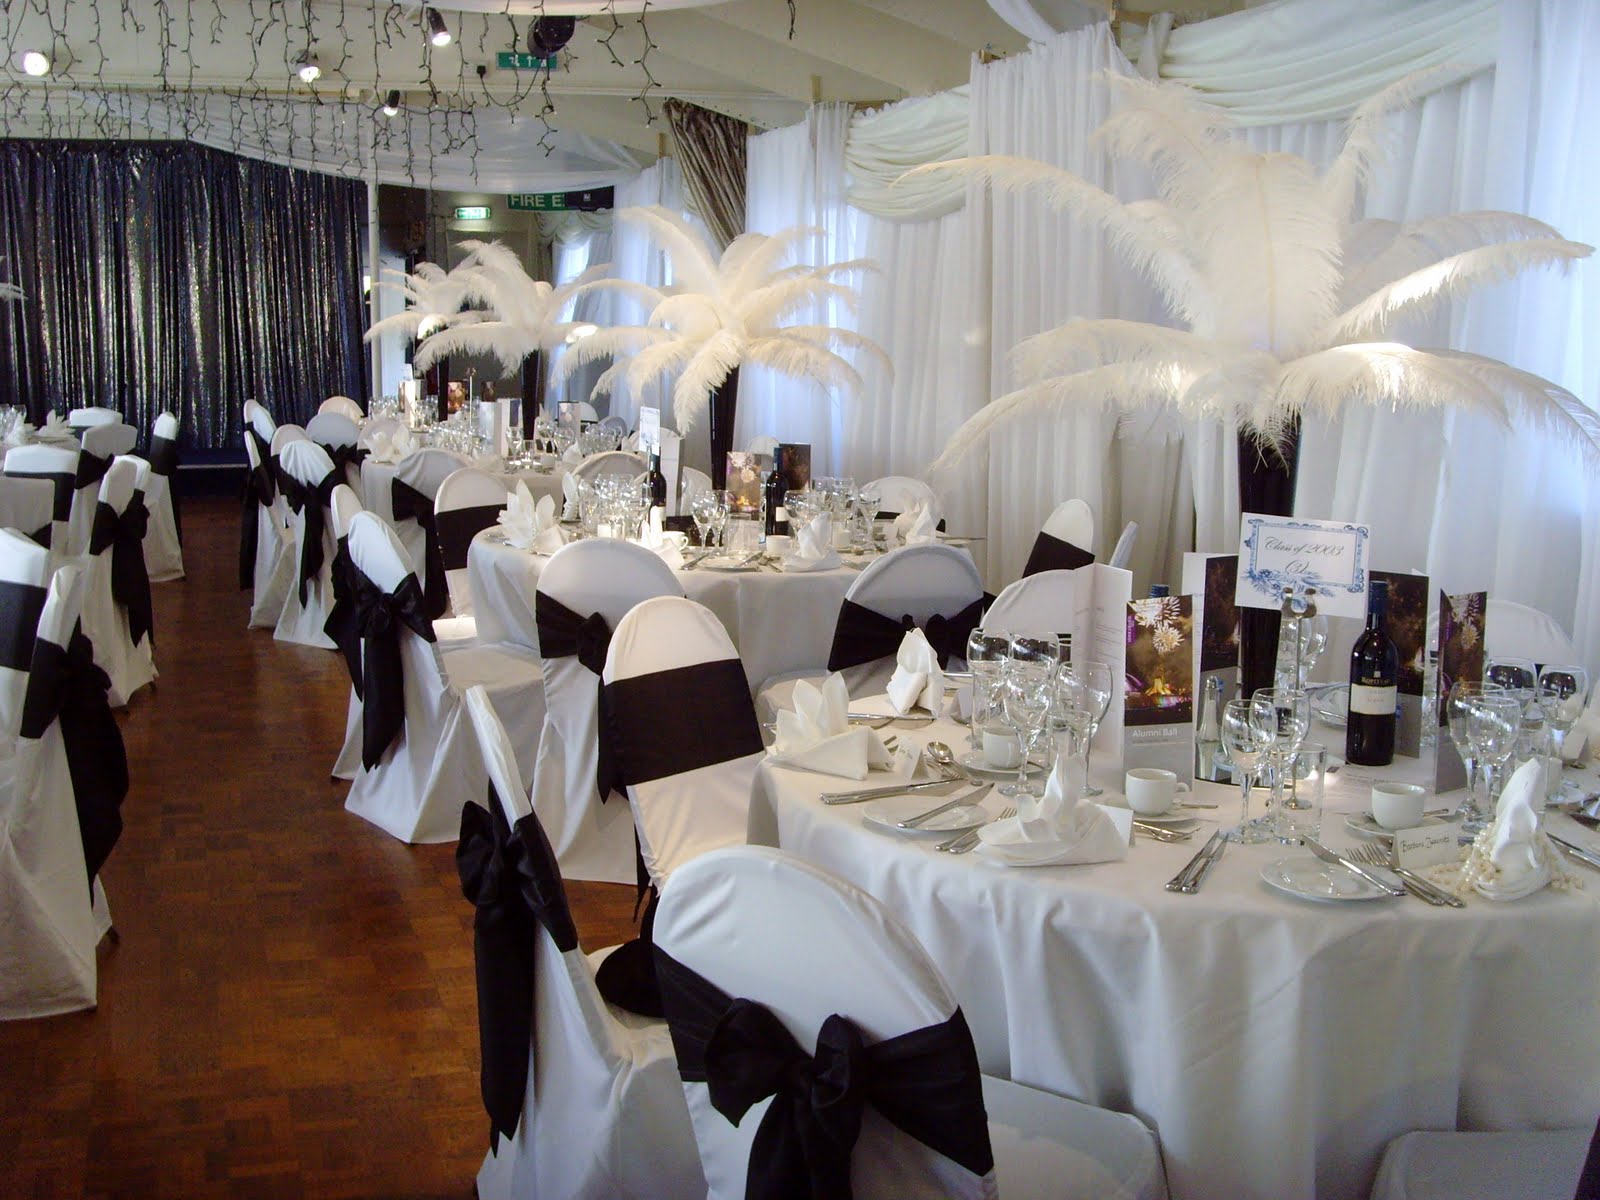 The Best Wedding  Decorations  Wedding  Venues  Decorations  Guide